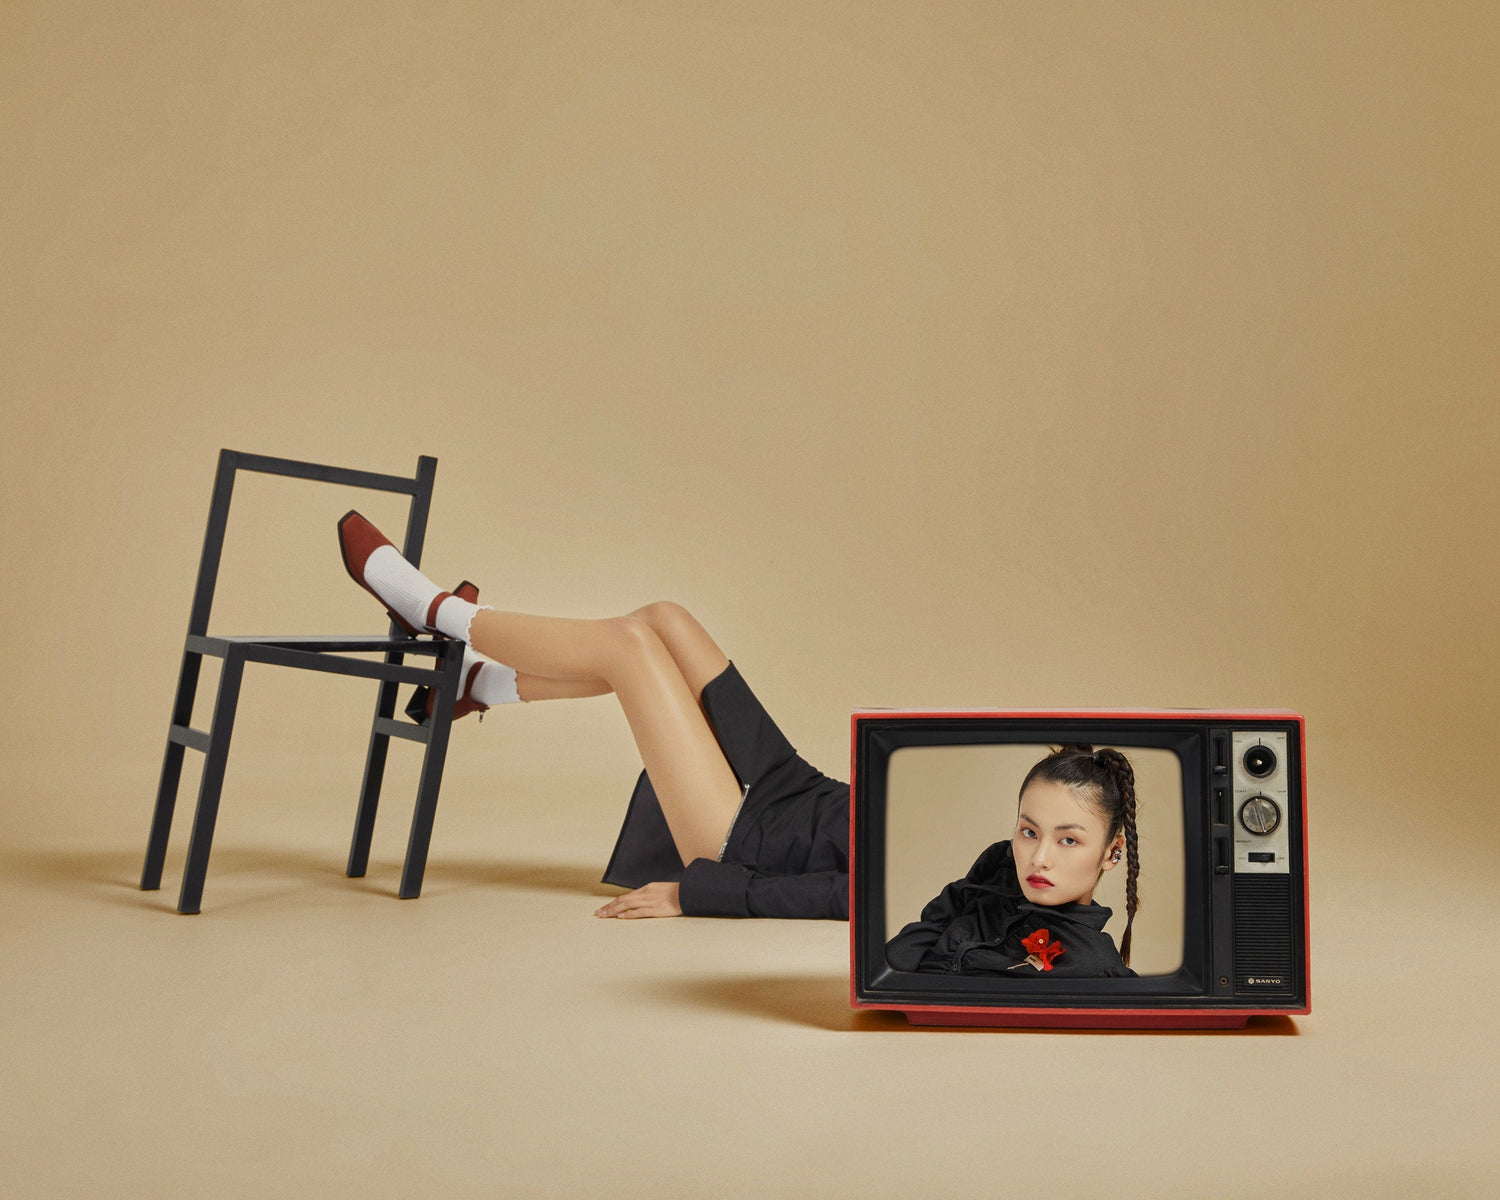 The artpiece 'Upside down' by Hui Long shows a woman laying on the floor next to a strangely deformed chair, with a tv blocking the womans face. The TV shows a strong and determined looking woman facing the camera.